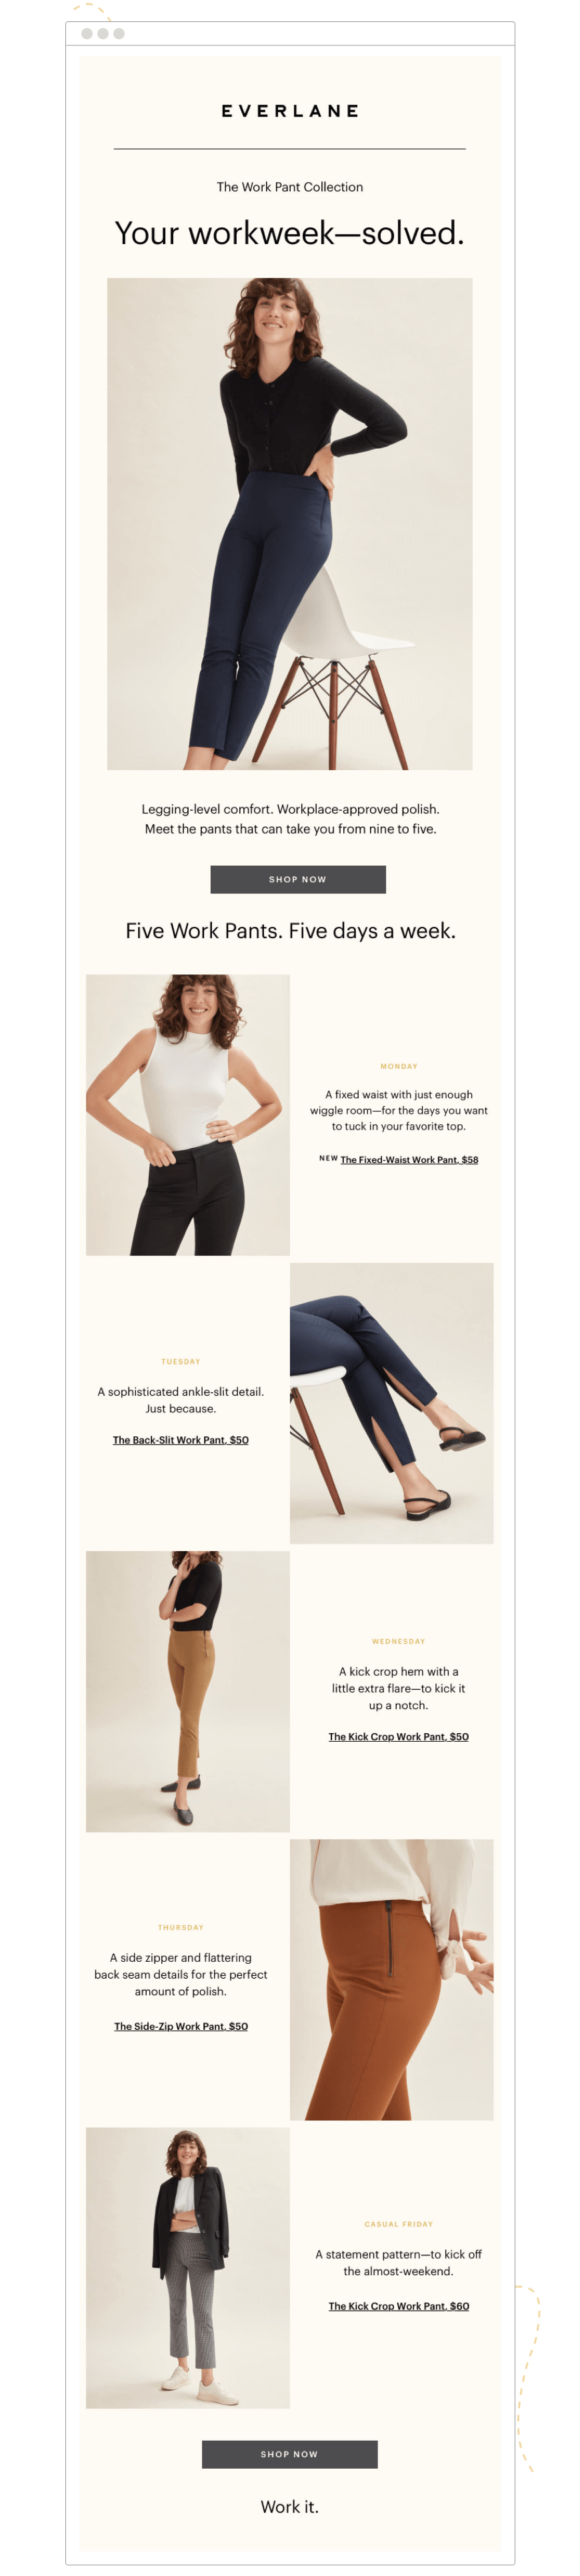 Hive.co_Email_Marketing_Fashion_Ecommerce_Email_Templates_Everlane